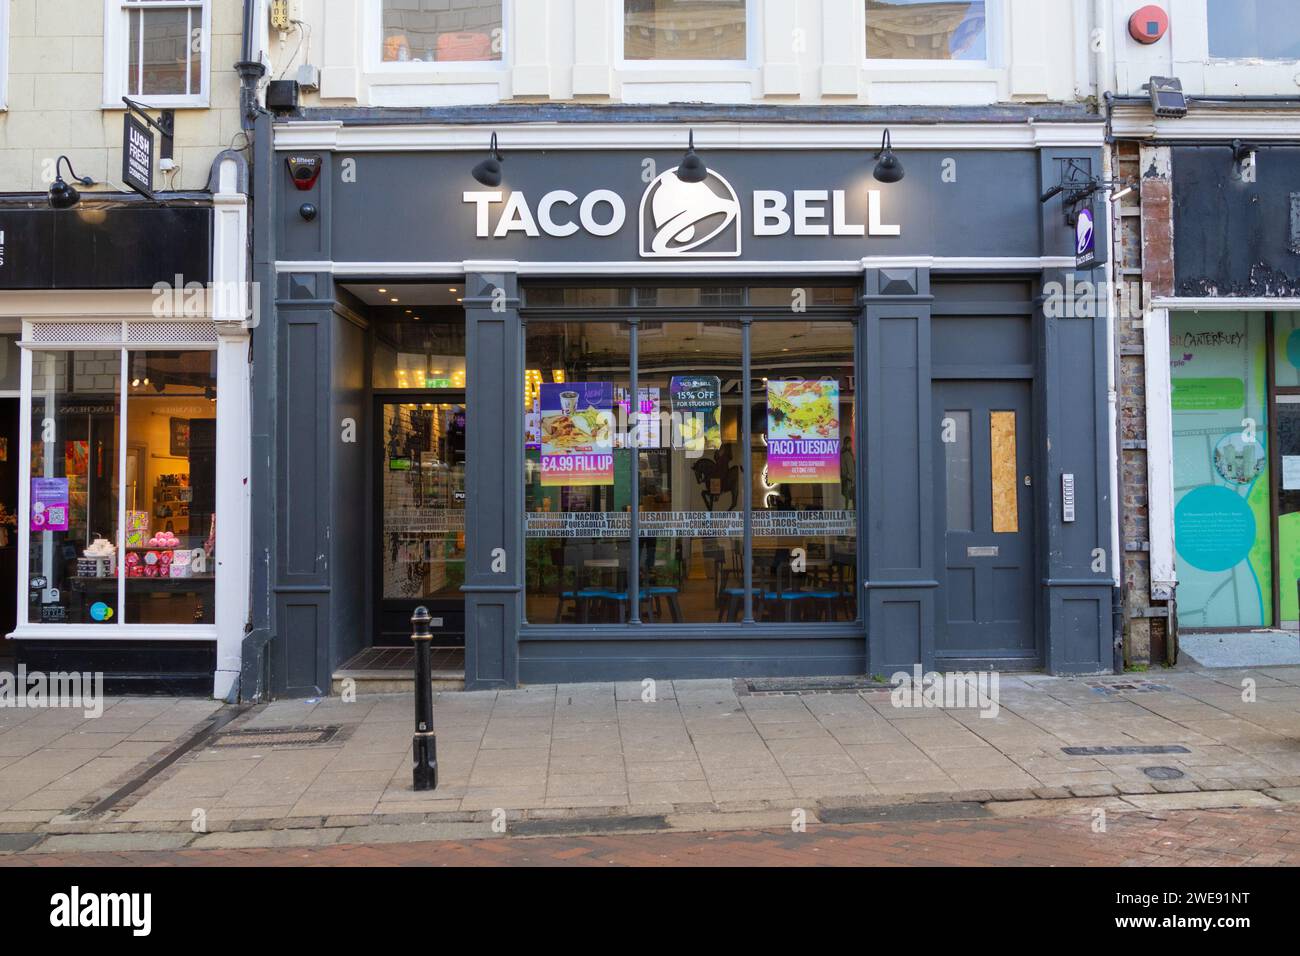 Taco bell outside frontage, canterbury, kent, uk Stock Photo